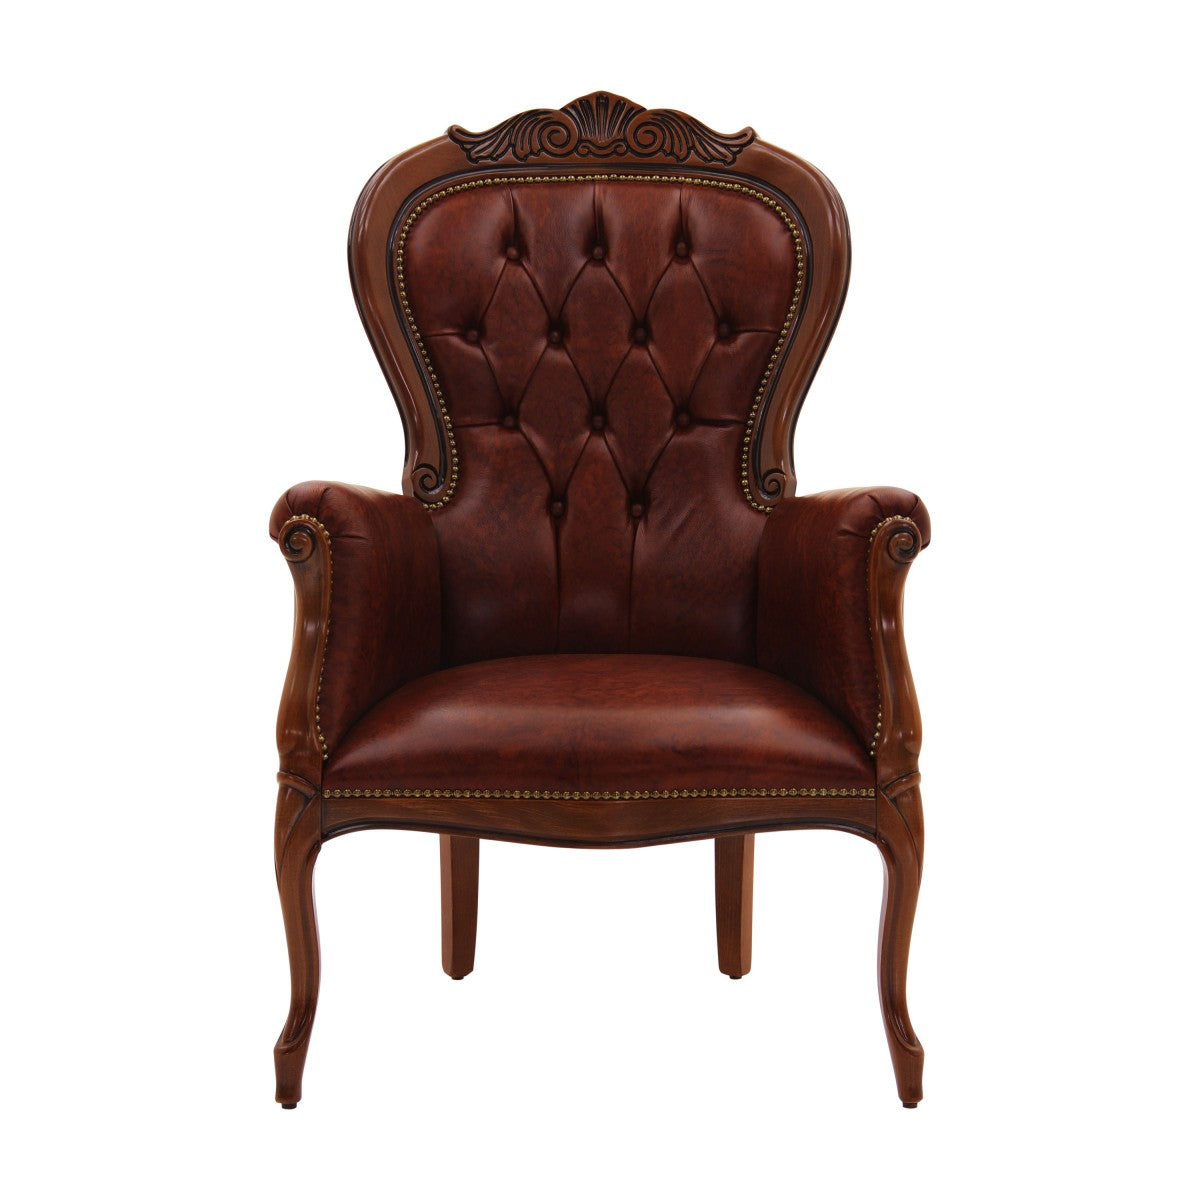 Foglia Bespoke Upholstered Classic Louis Philippe Style Armchair MS218P Custom Made To Order